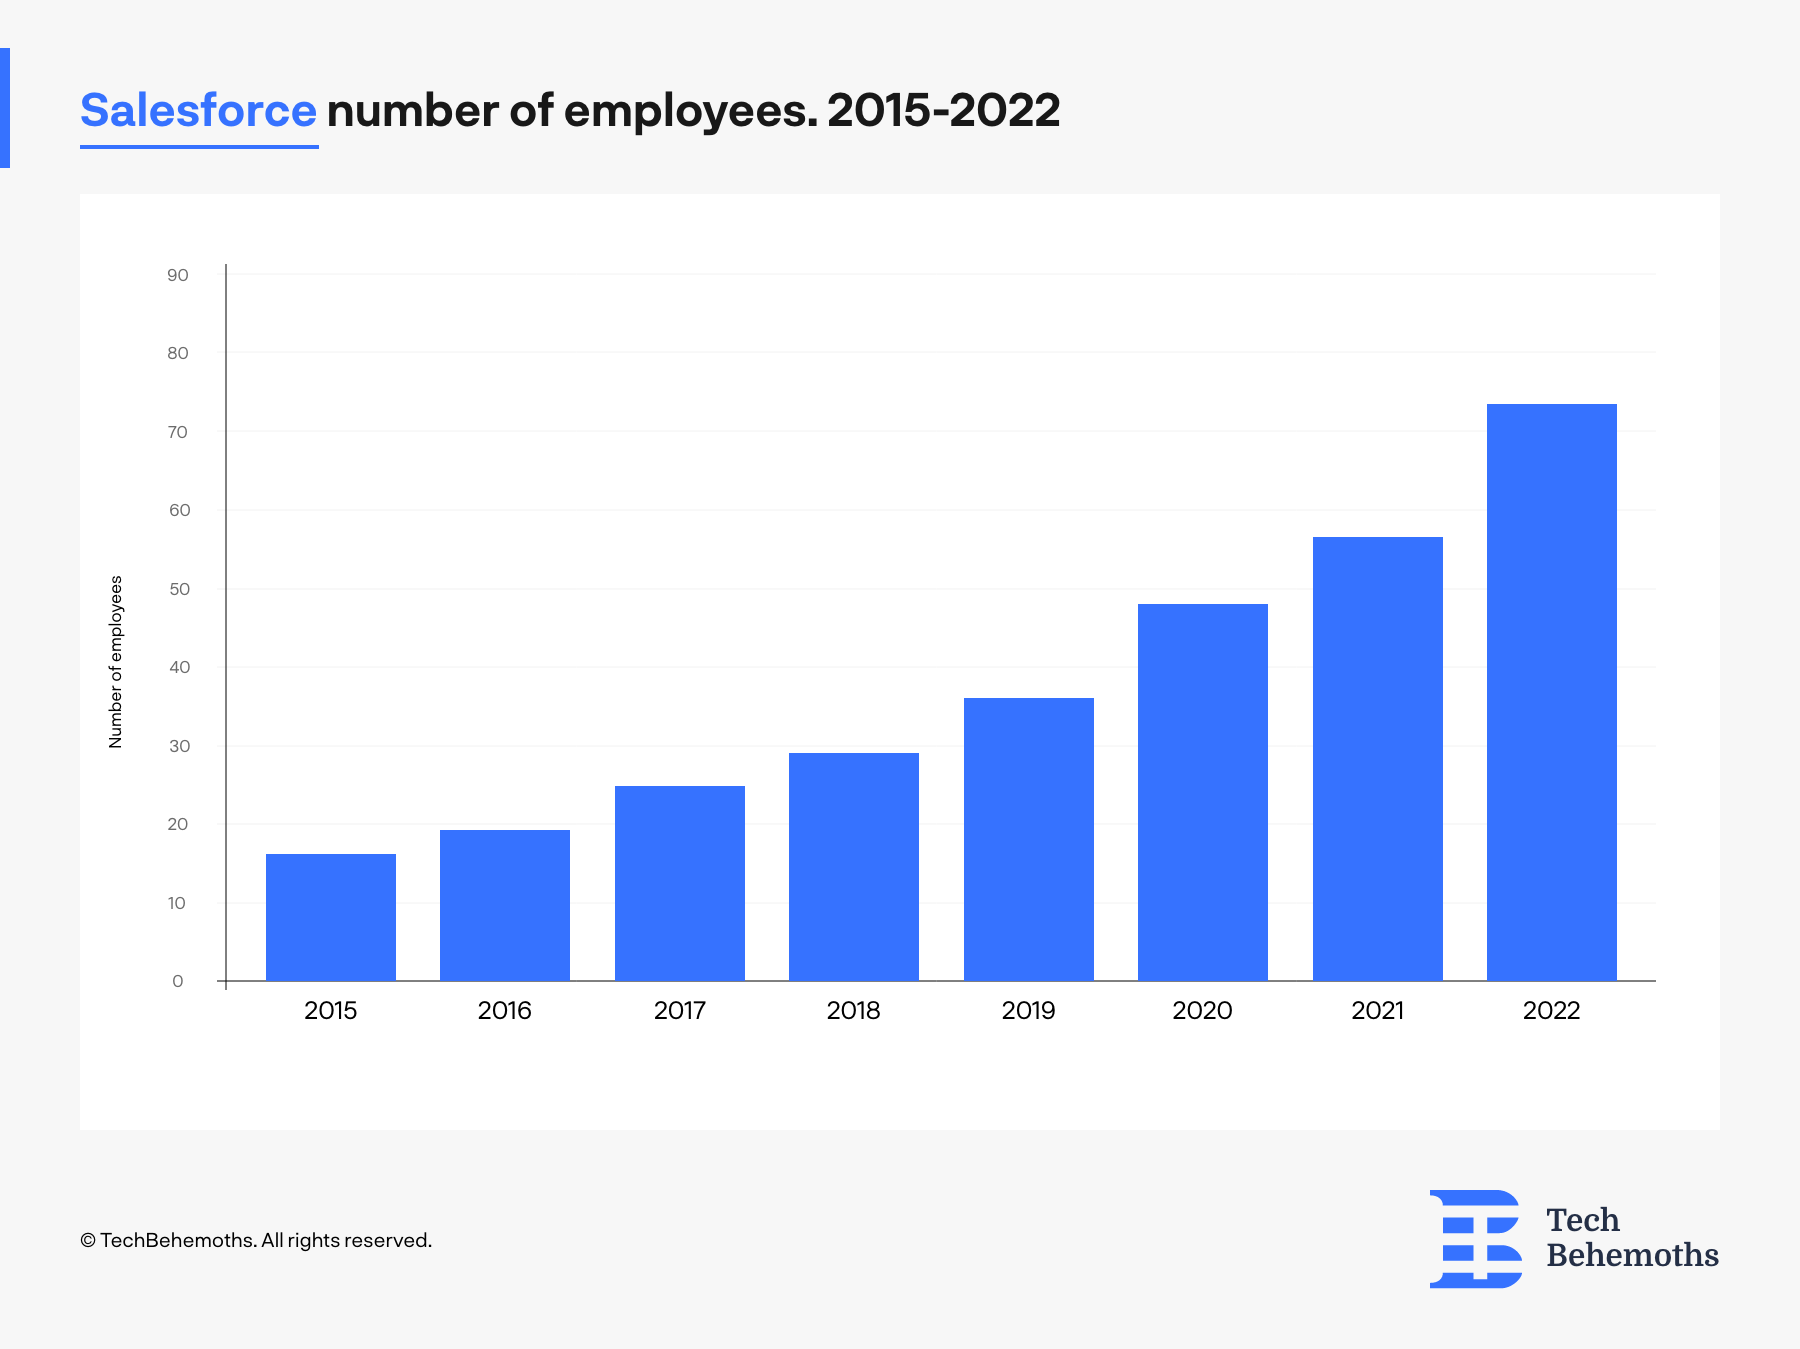 Number of employees at Salesforce between 2015-2022